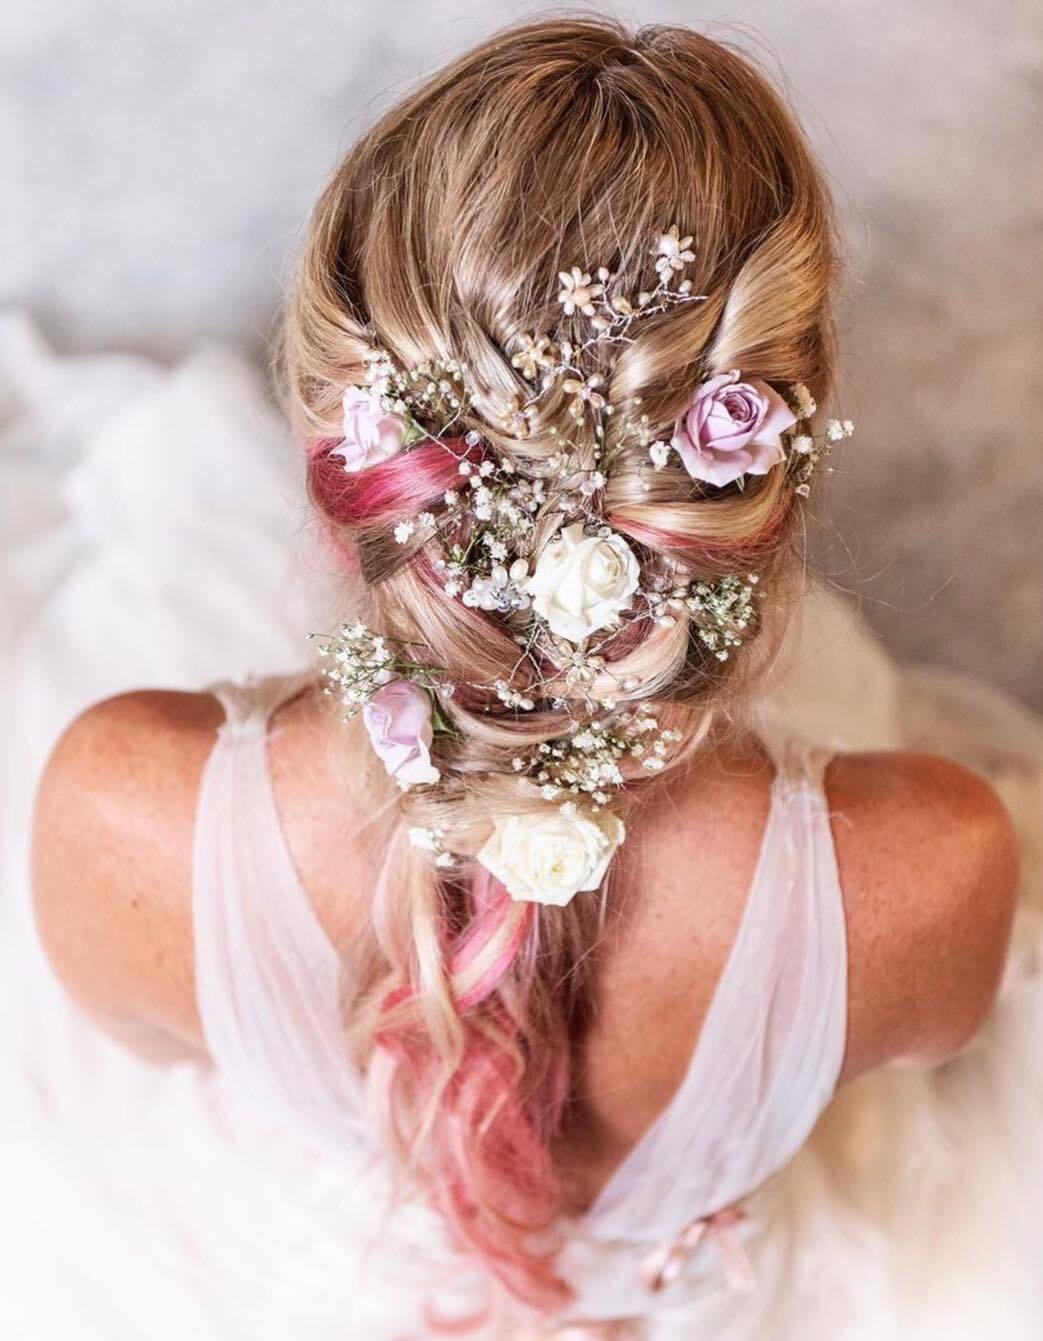 Wedding Hair up with flowers boho pink & Makeup by Jackie Jax-Glam Beauty Bristol for Bride